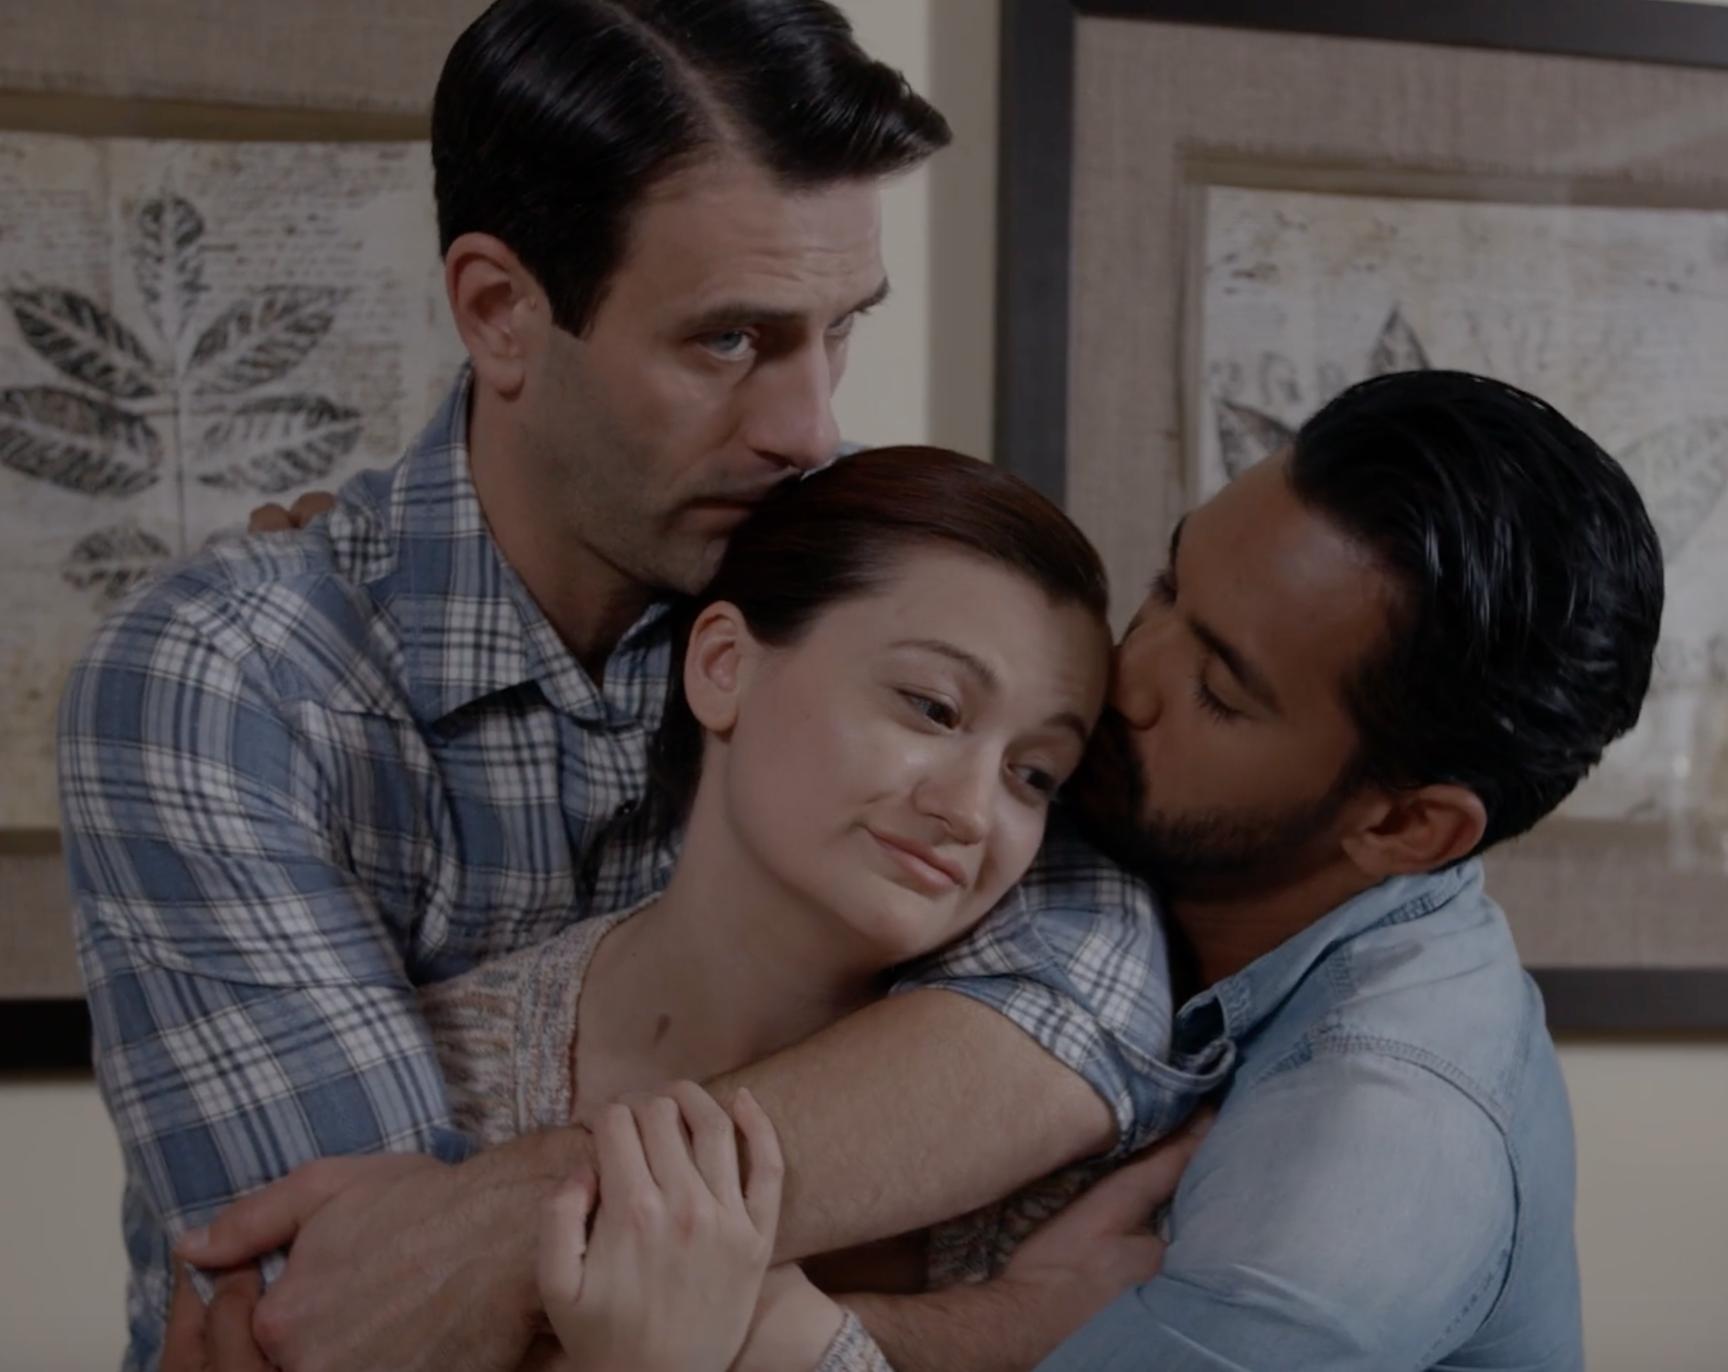 Beau and Caden hold Lily in an embrace inside the living room.